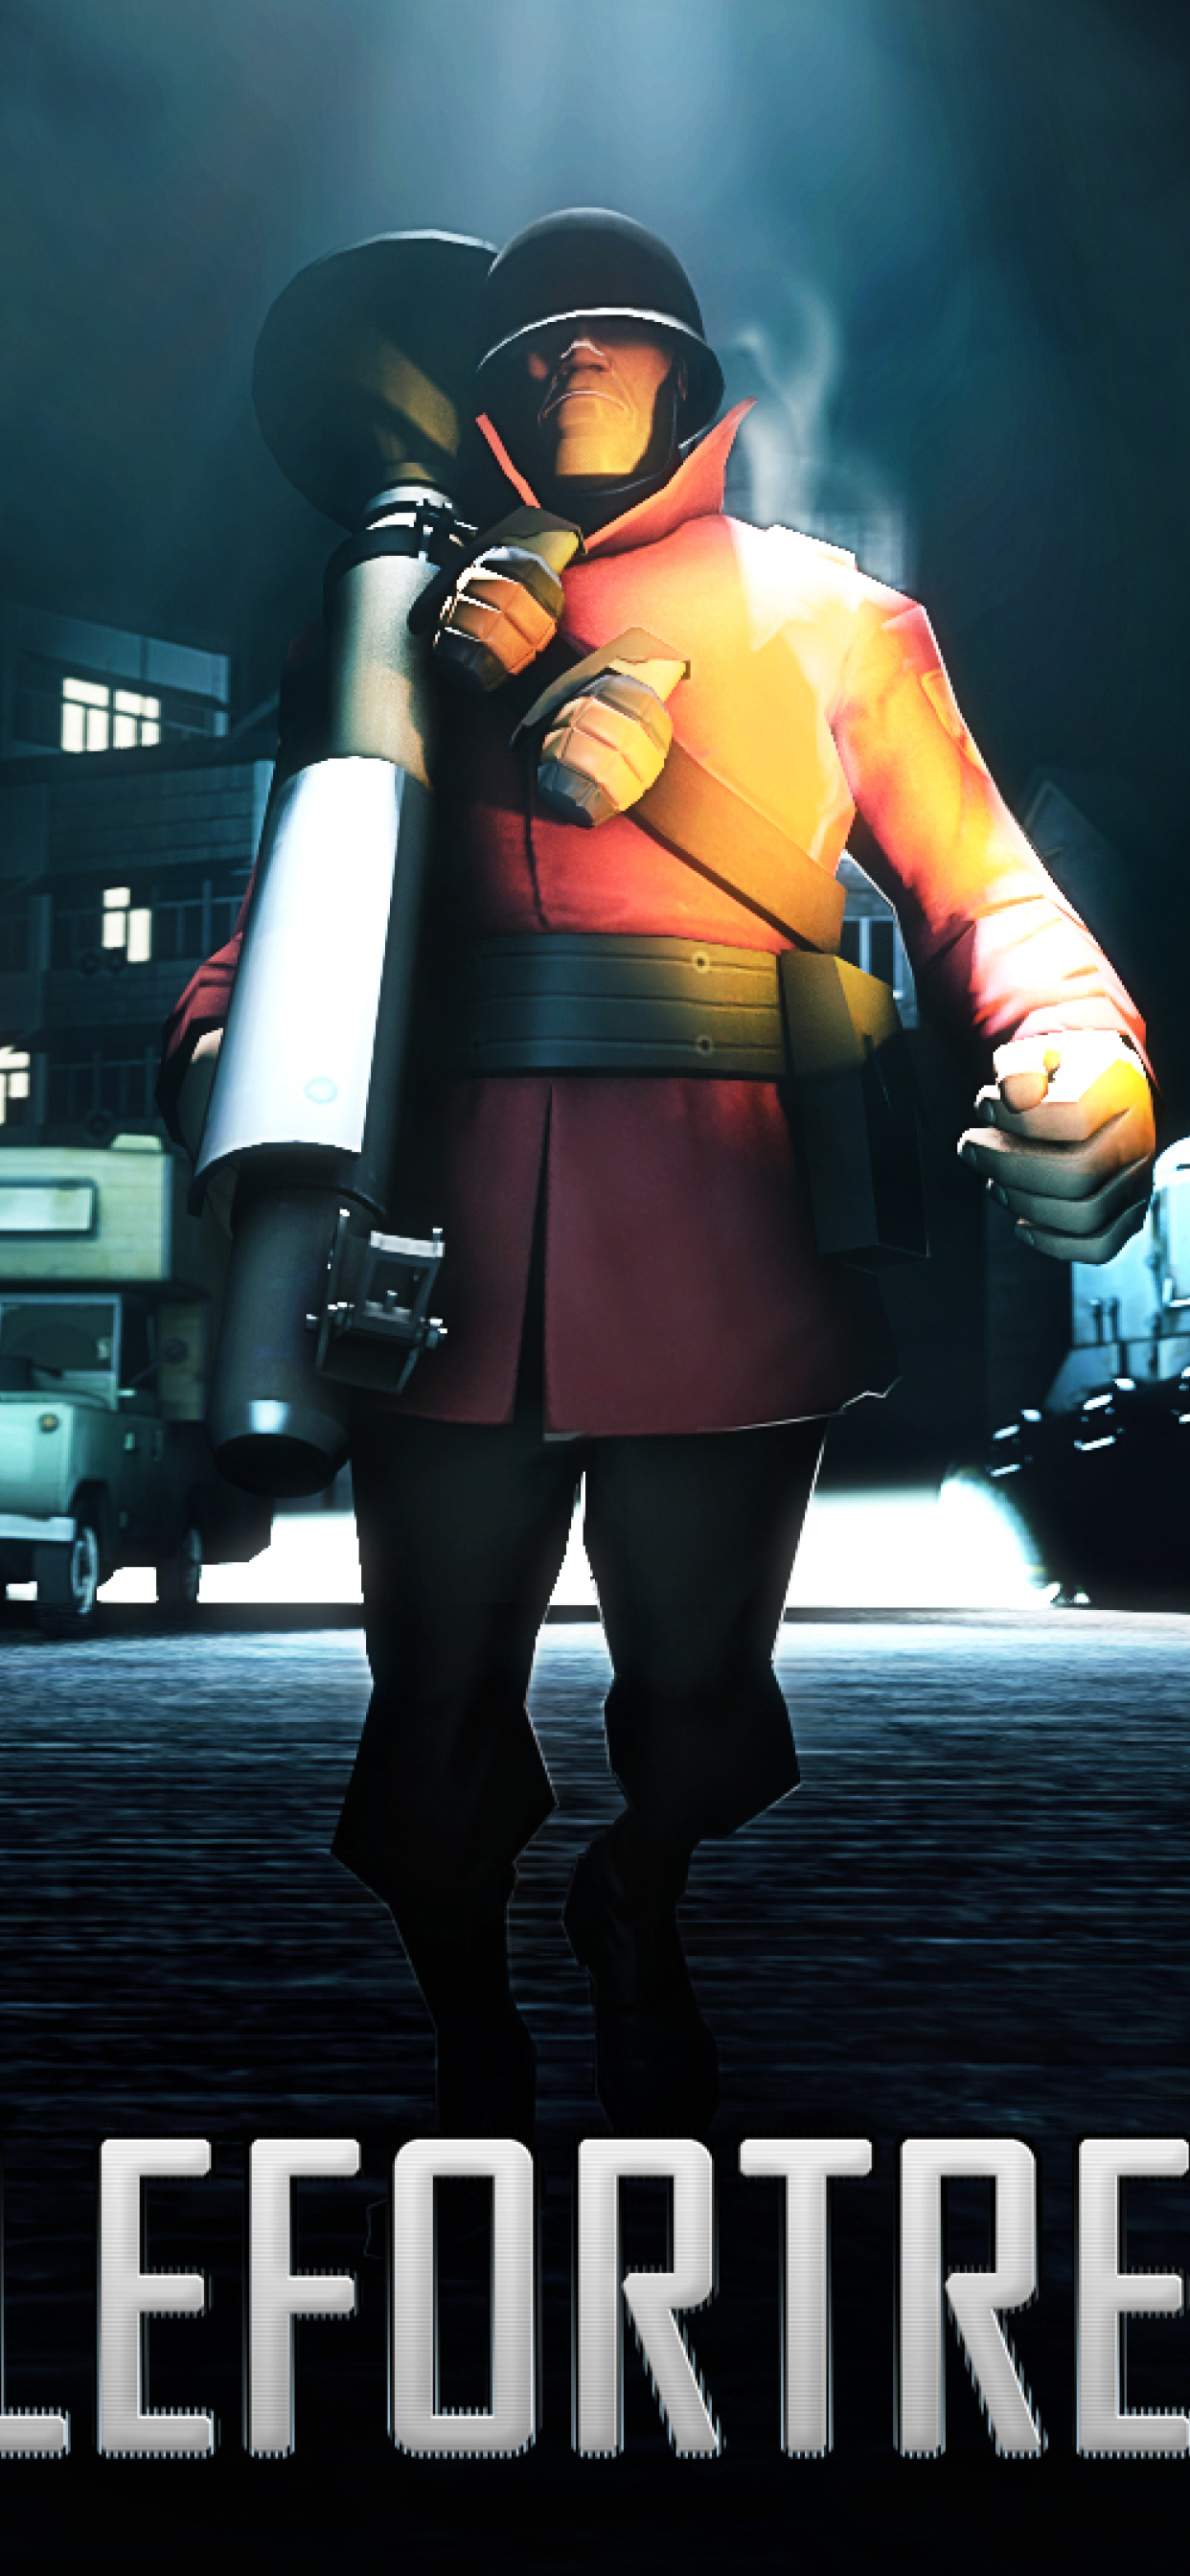 Android Tf2 Wallpapers / Tf2 cabinet phone wallpaper by devilmage on